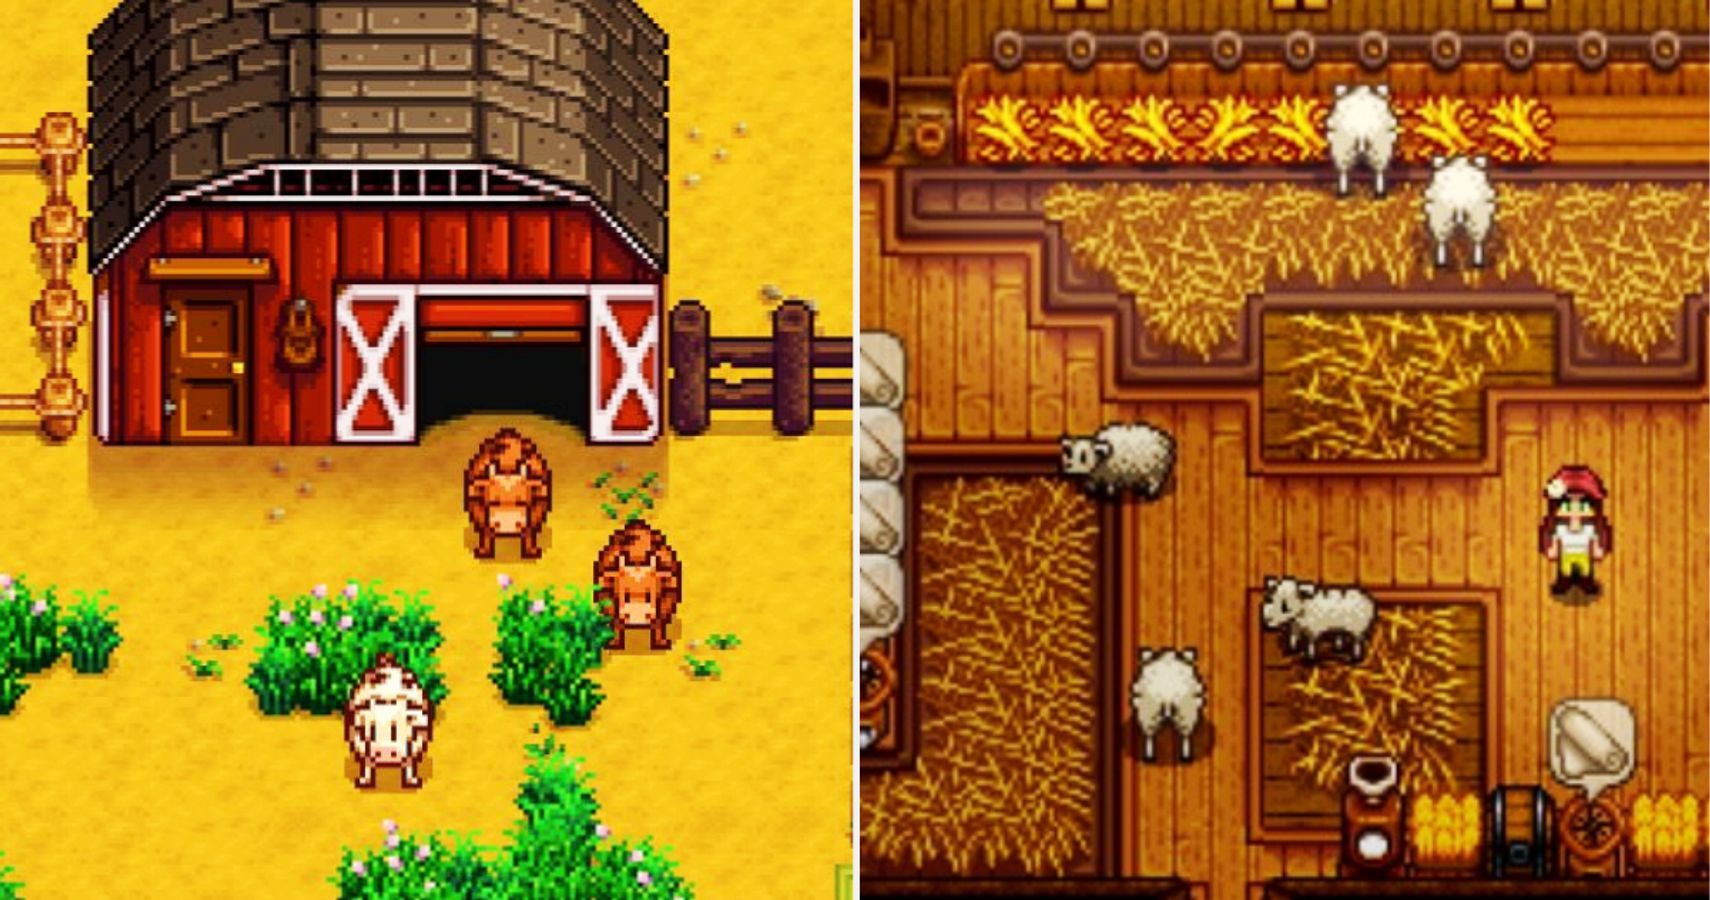 Stardew Valley Barn Animals And Barn From Inside